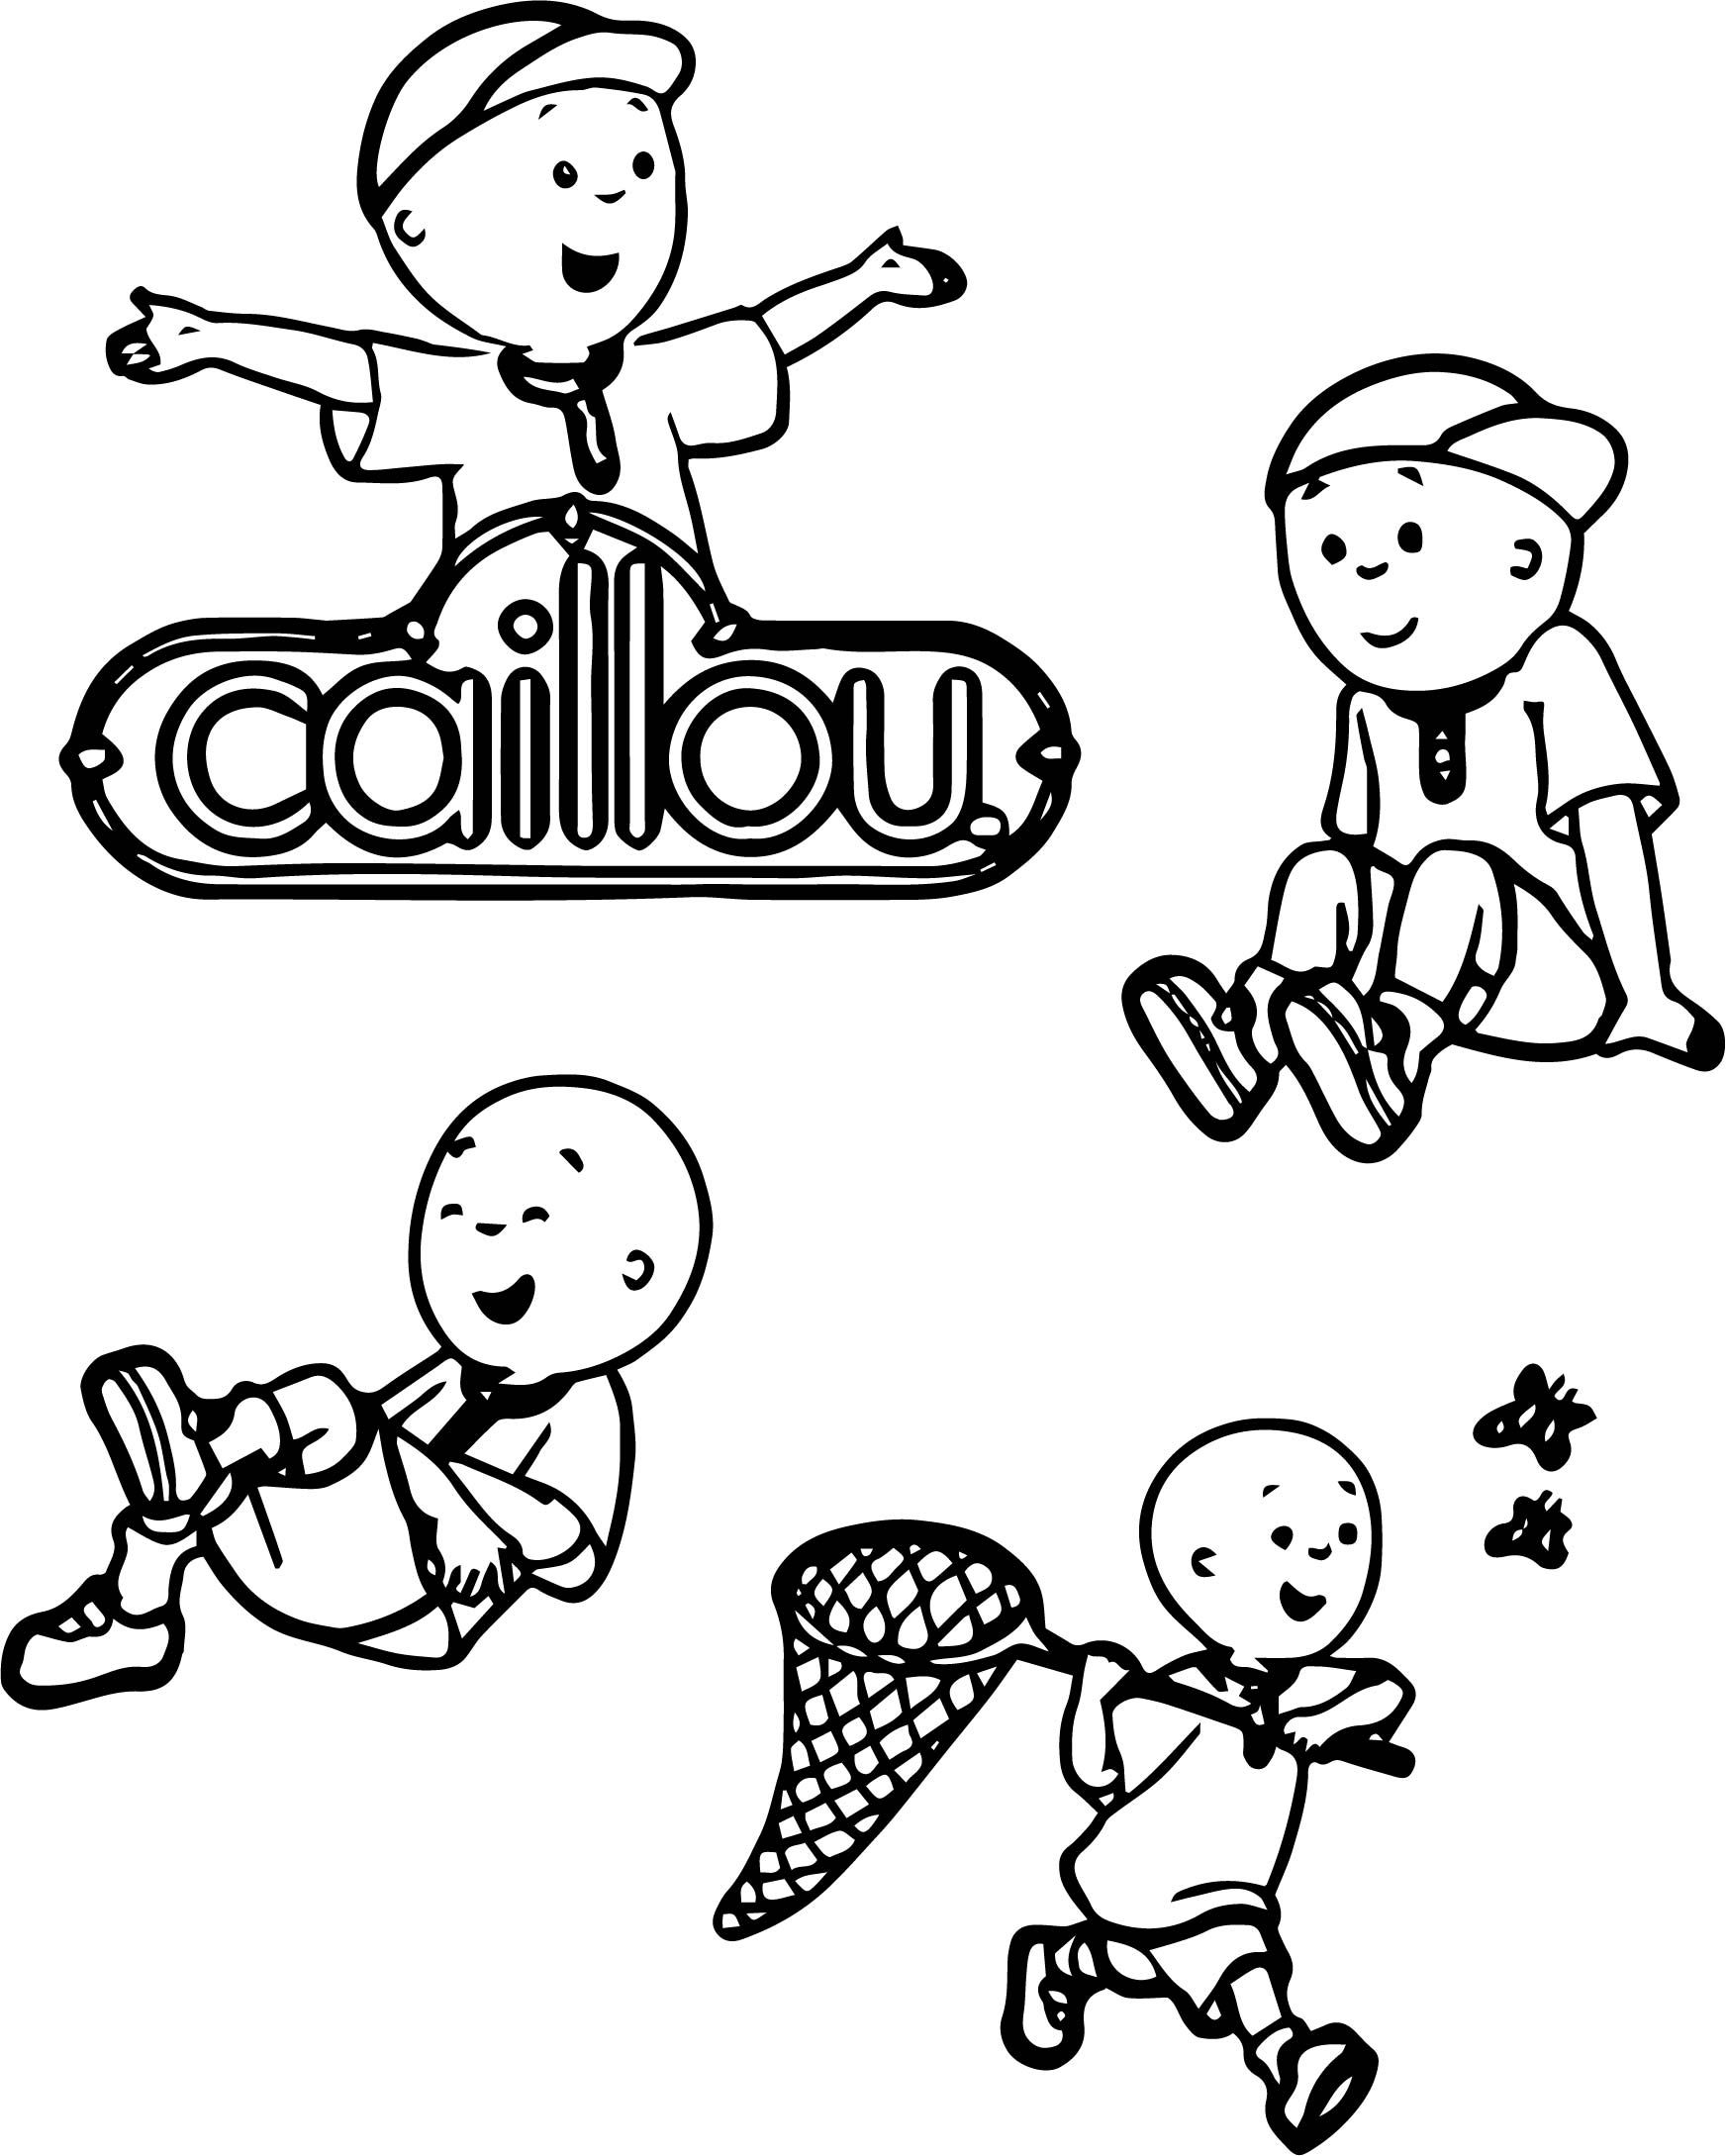 caillou printable coloring pages